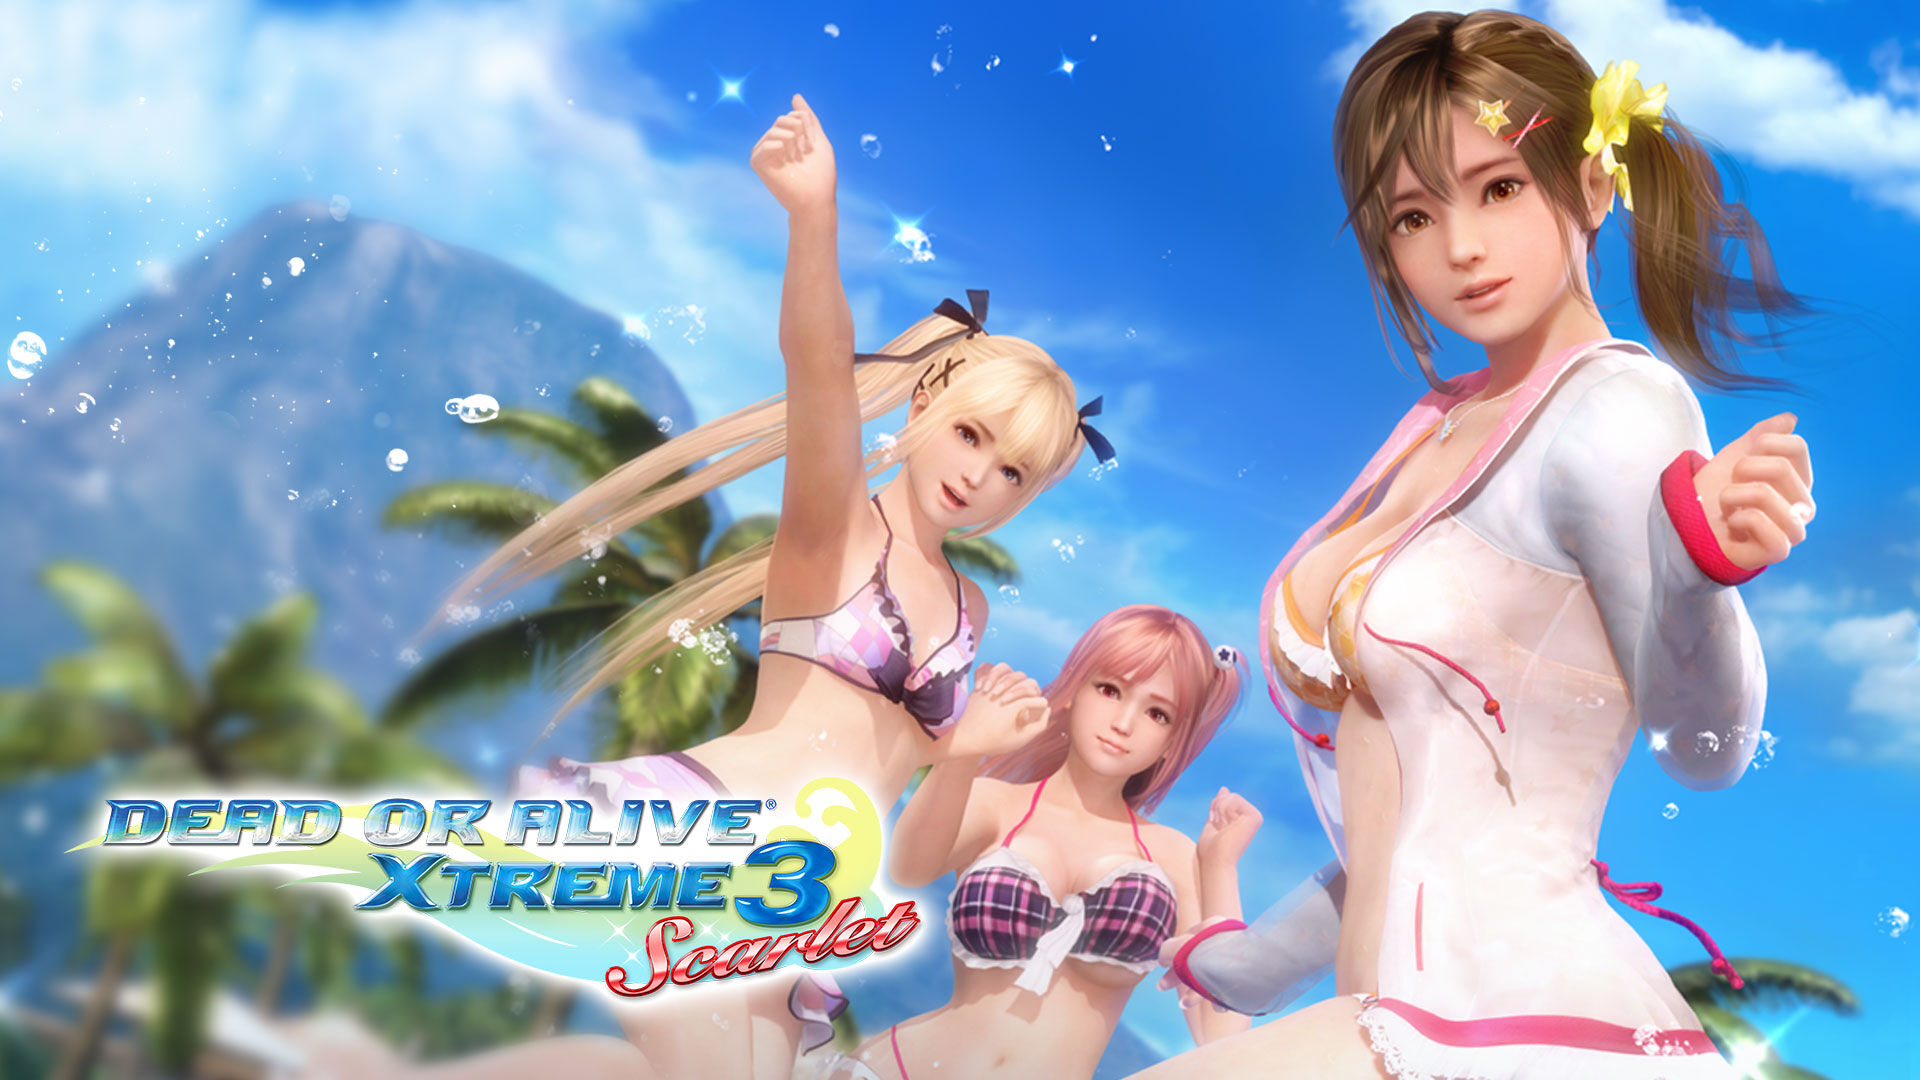 DEAD OR ALIVE Xtreme 3 Scarlet ダウンロード版 | My Nintendo Store 